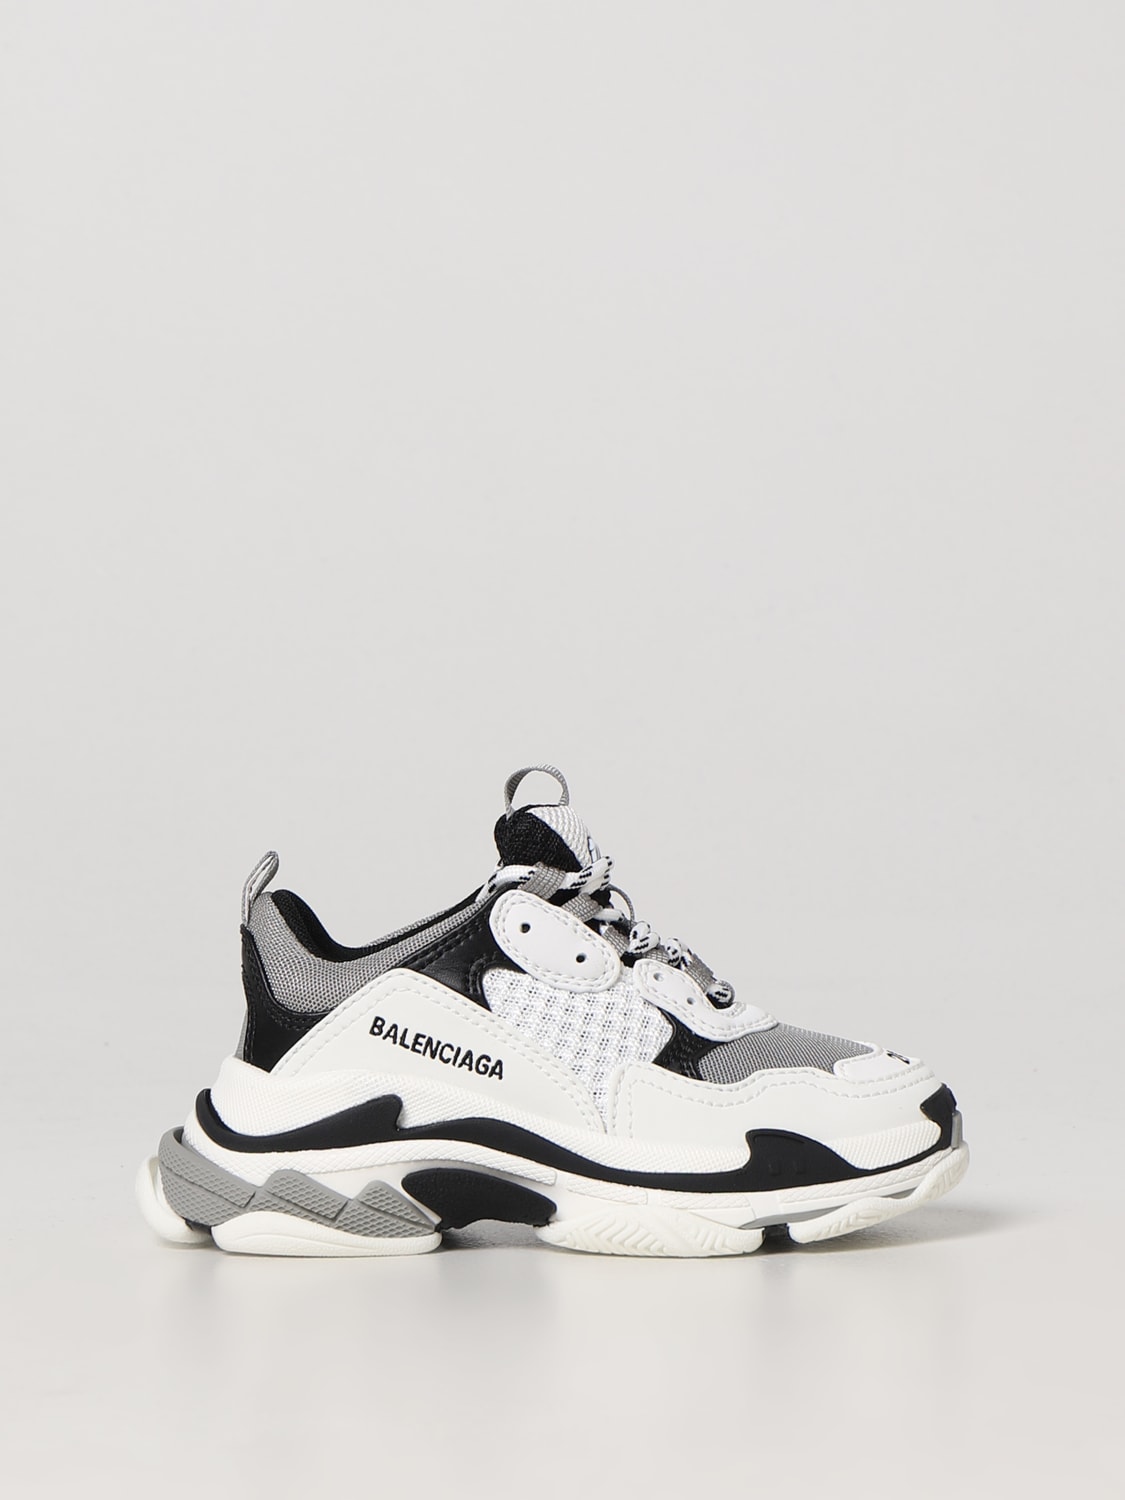 BALENCIAGA: Triple S sneakers in synthetic leather and mesh | Balenciaga shoes 654251W2CA8 online on